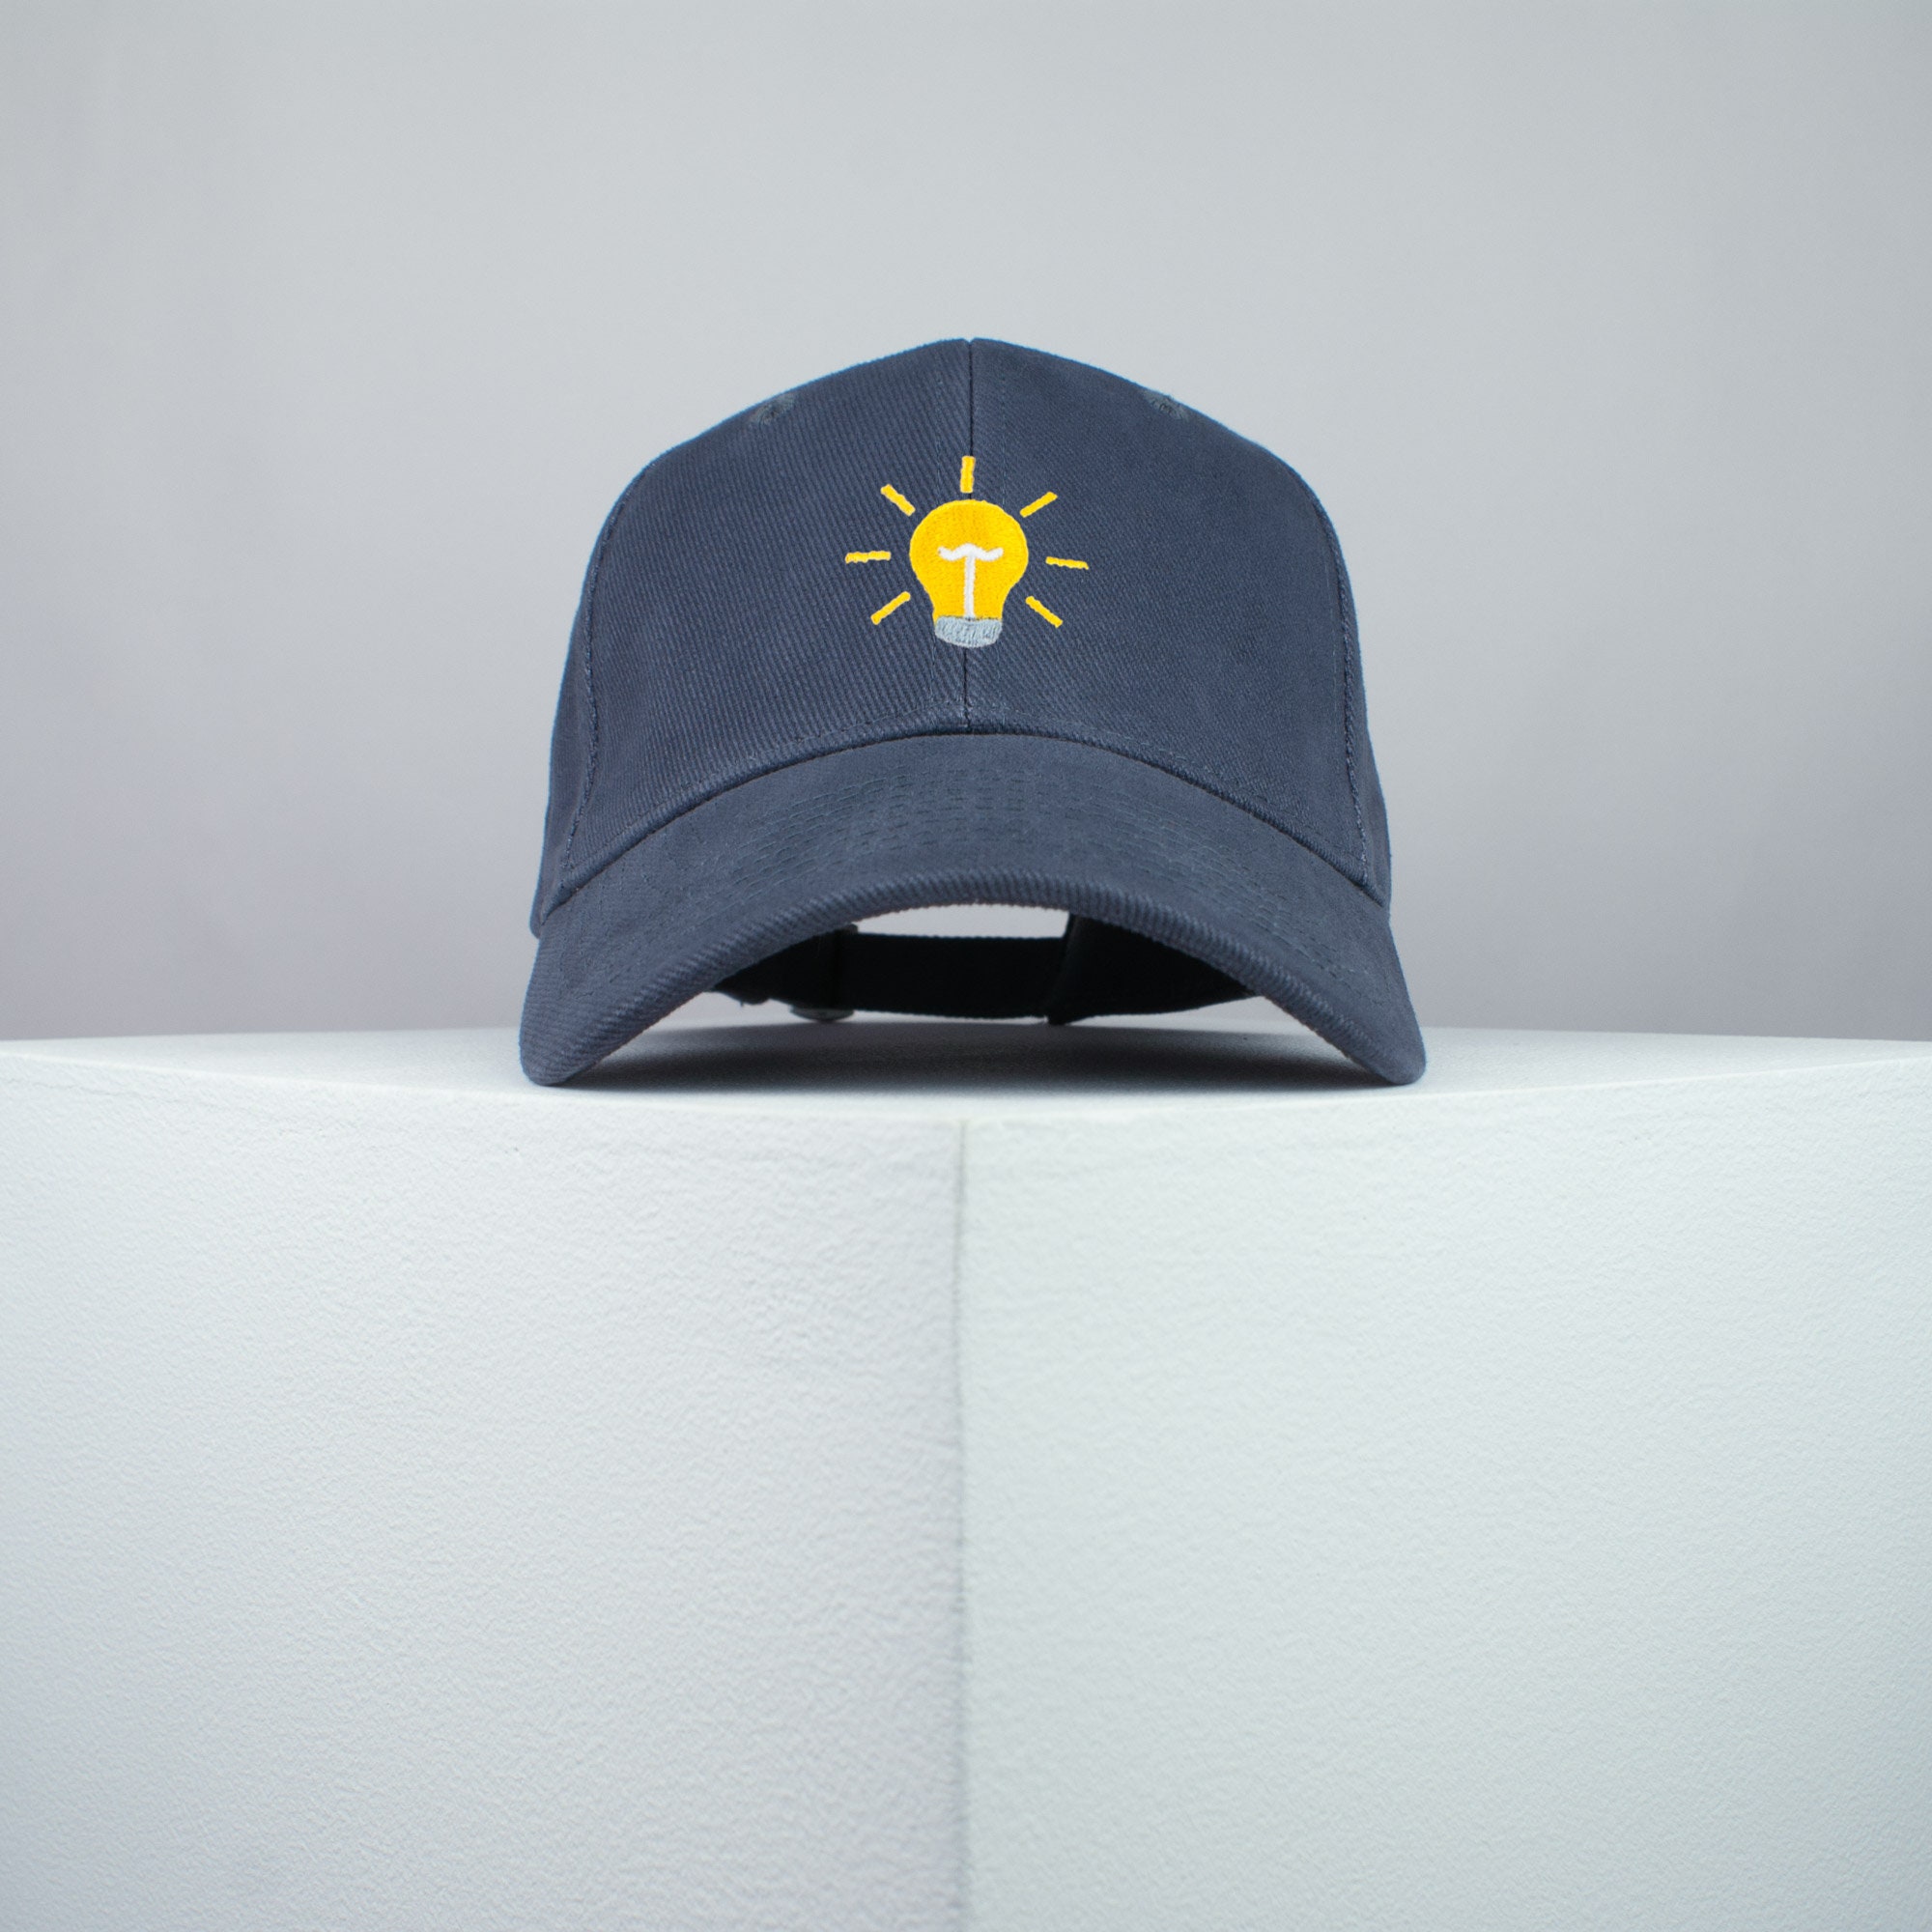 Light Bulb Embroidered Baseball Cap / Light / Patches / Feminist / Embroidery / Patch / Hat / Dad Hat / Cap // Hatty Hats